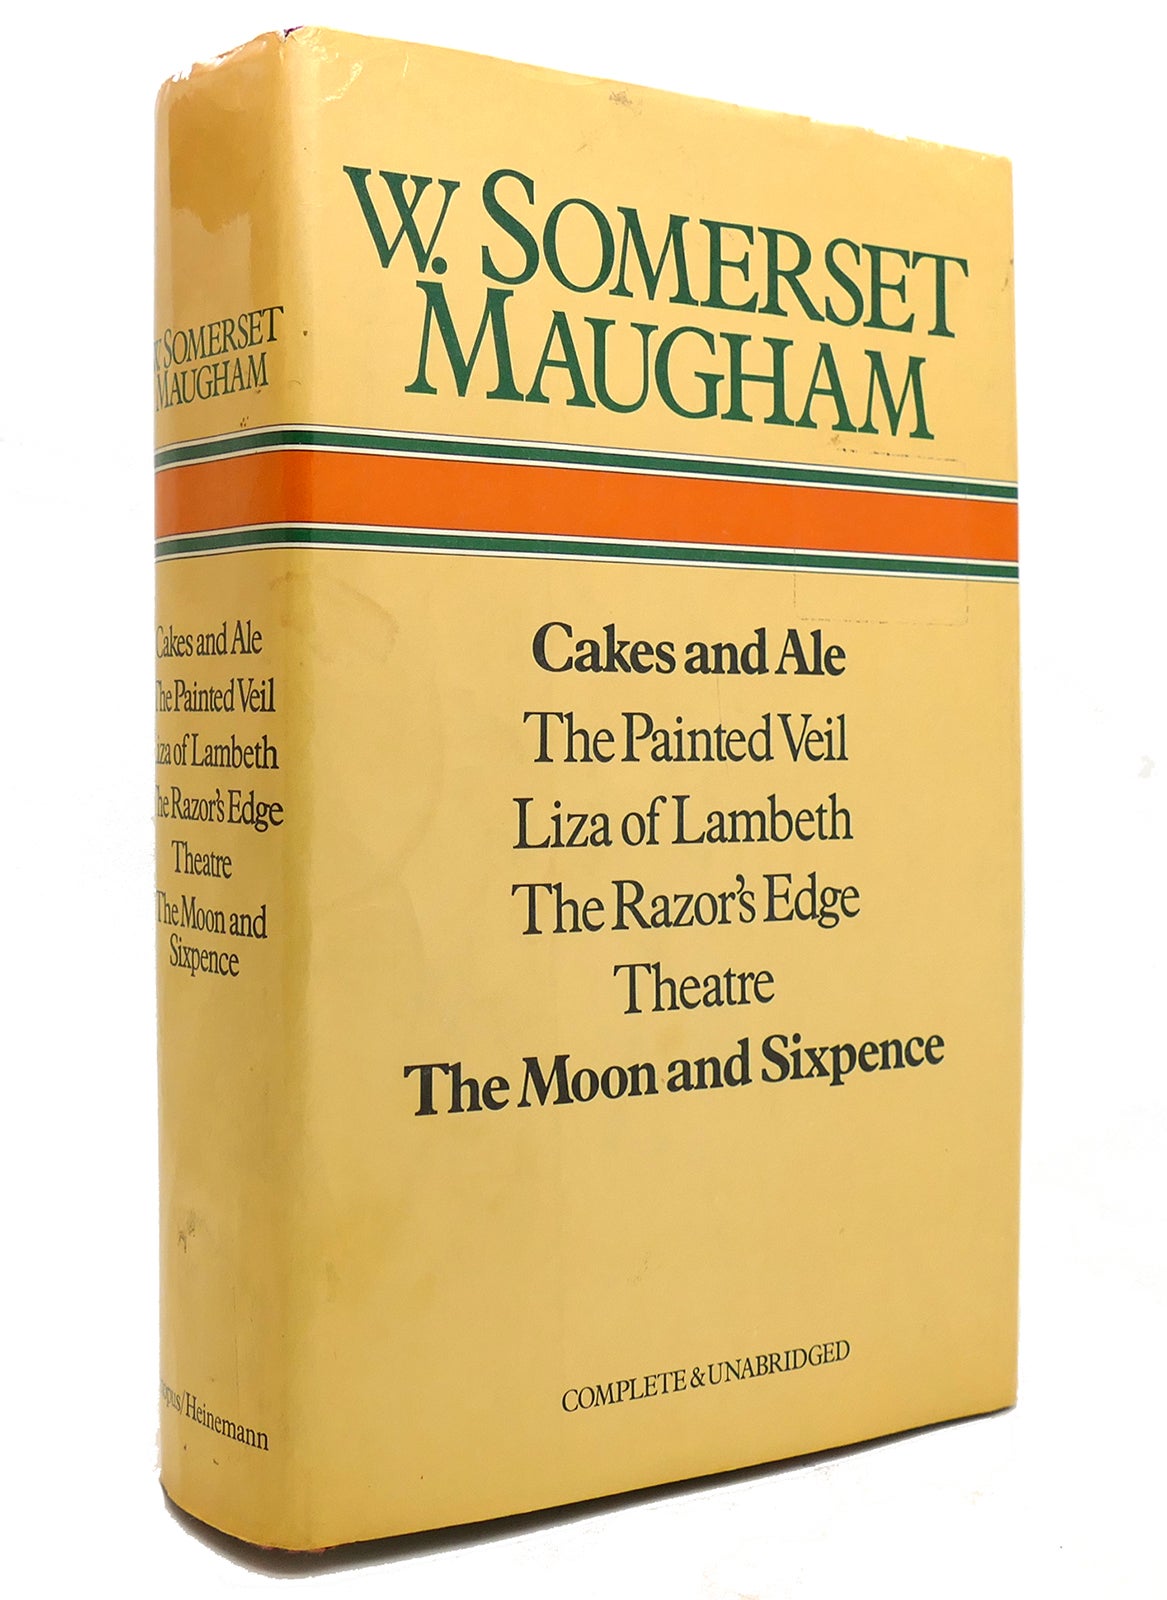 Pocket Books 1158 - W. Somerset Maugham - Cakes and Ale | Flickr